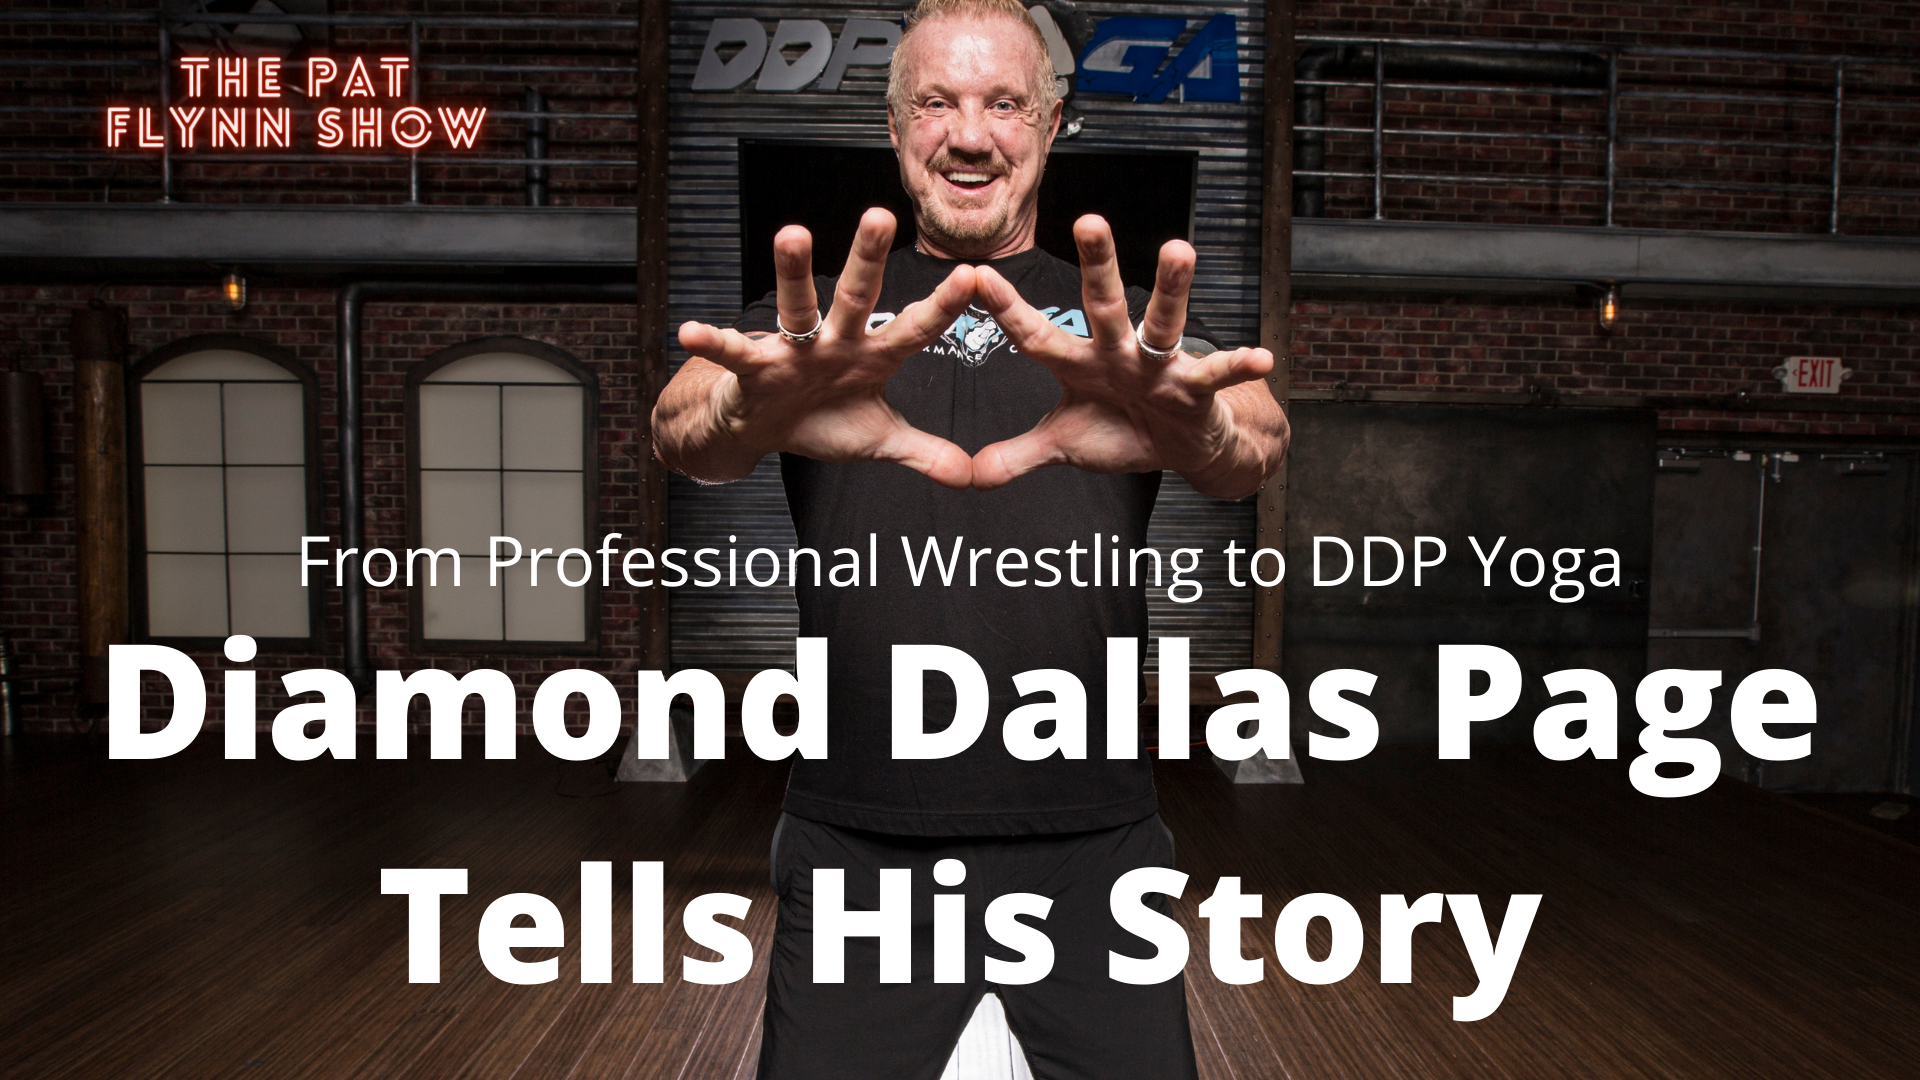 Diamond Dallas Page Tells His Story: From Professional Wrestling to DDP Yoga  - Chronicles of Strength